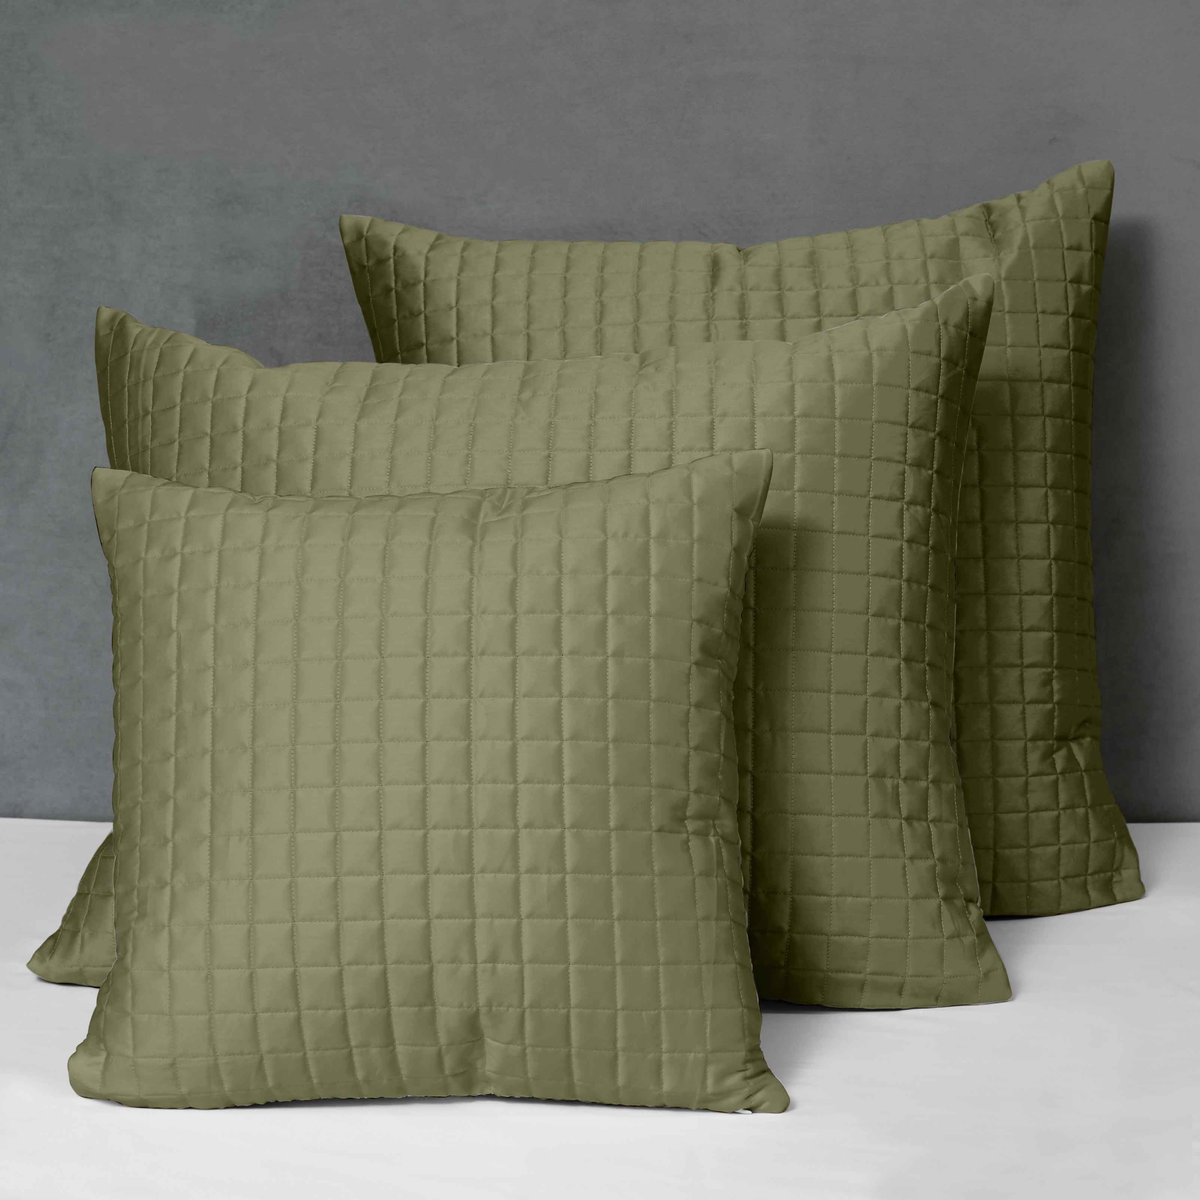 Different Sizes of Quilted Shams of Signoria Masaccio Bedding in Olive Green Color